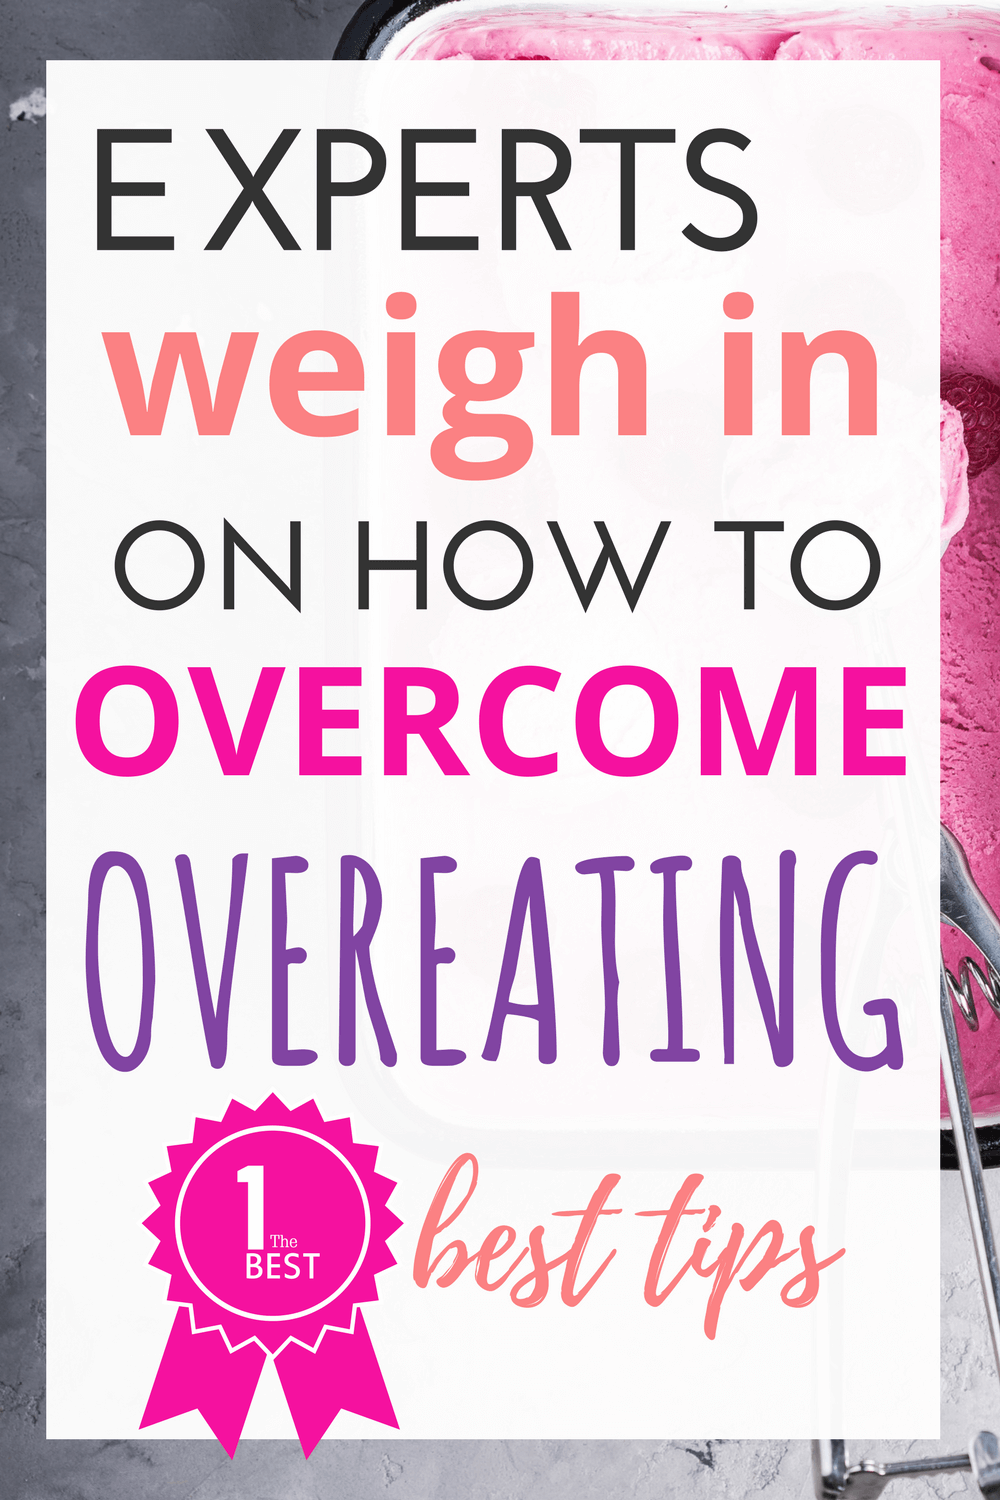 10 Experts Weigh In on How to Overcome Overeating